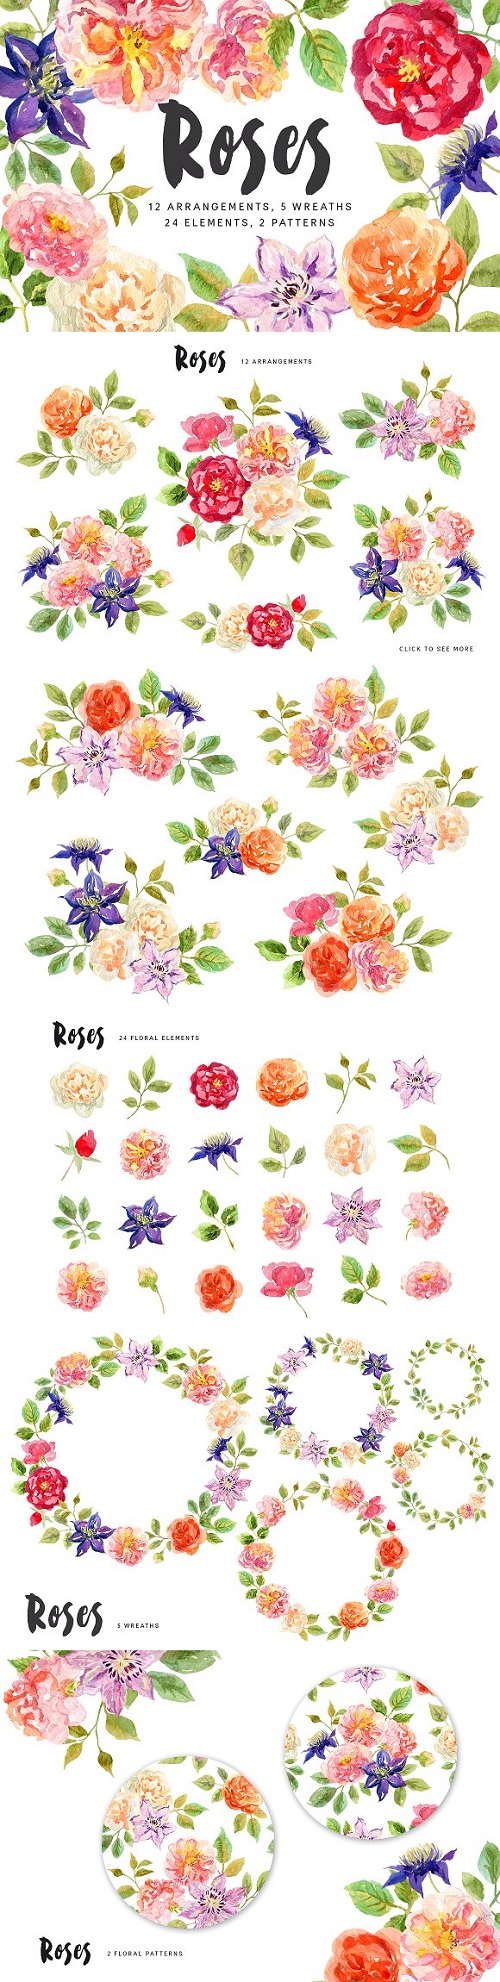 Roses. Watercolor collection - 1759881